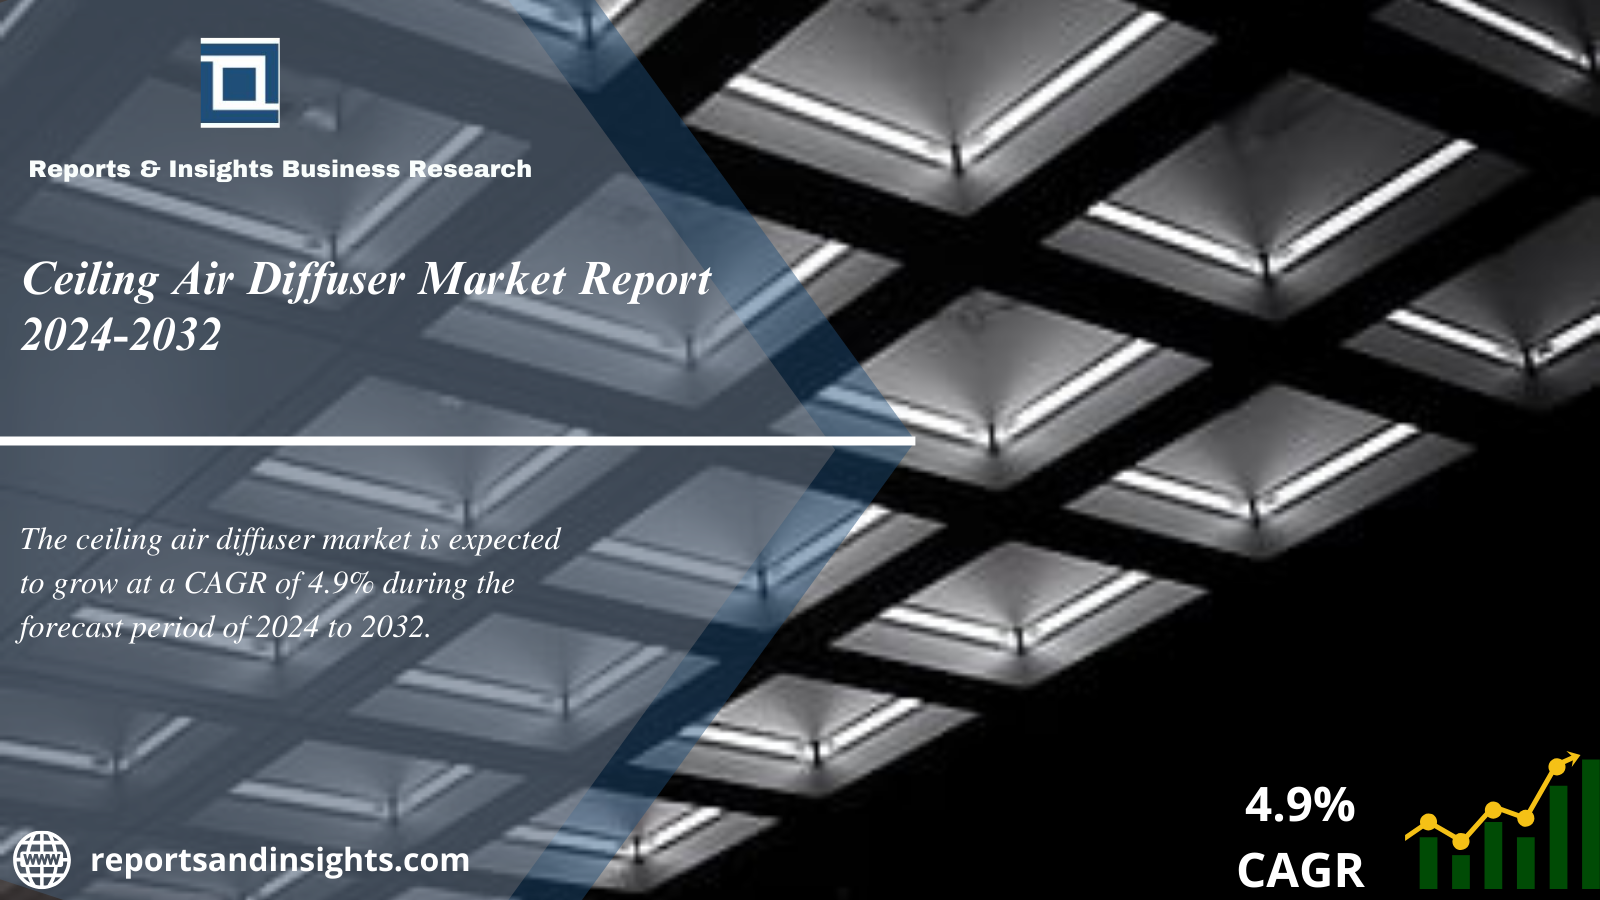 Ceiling Air Diffuser Market 2024 to 2032, Size, Price, Trends, Share, Growth, Industry Report and Forecast